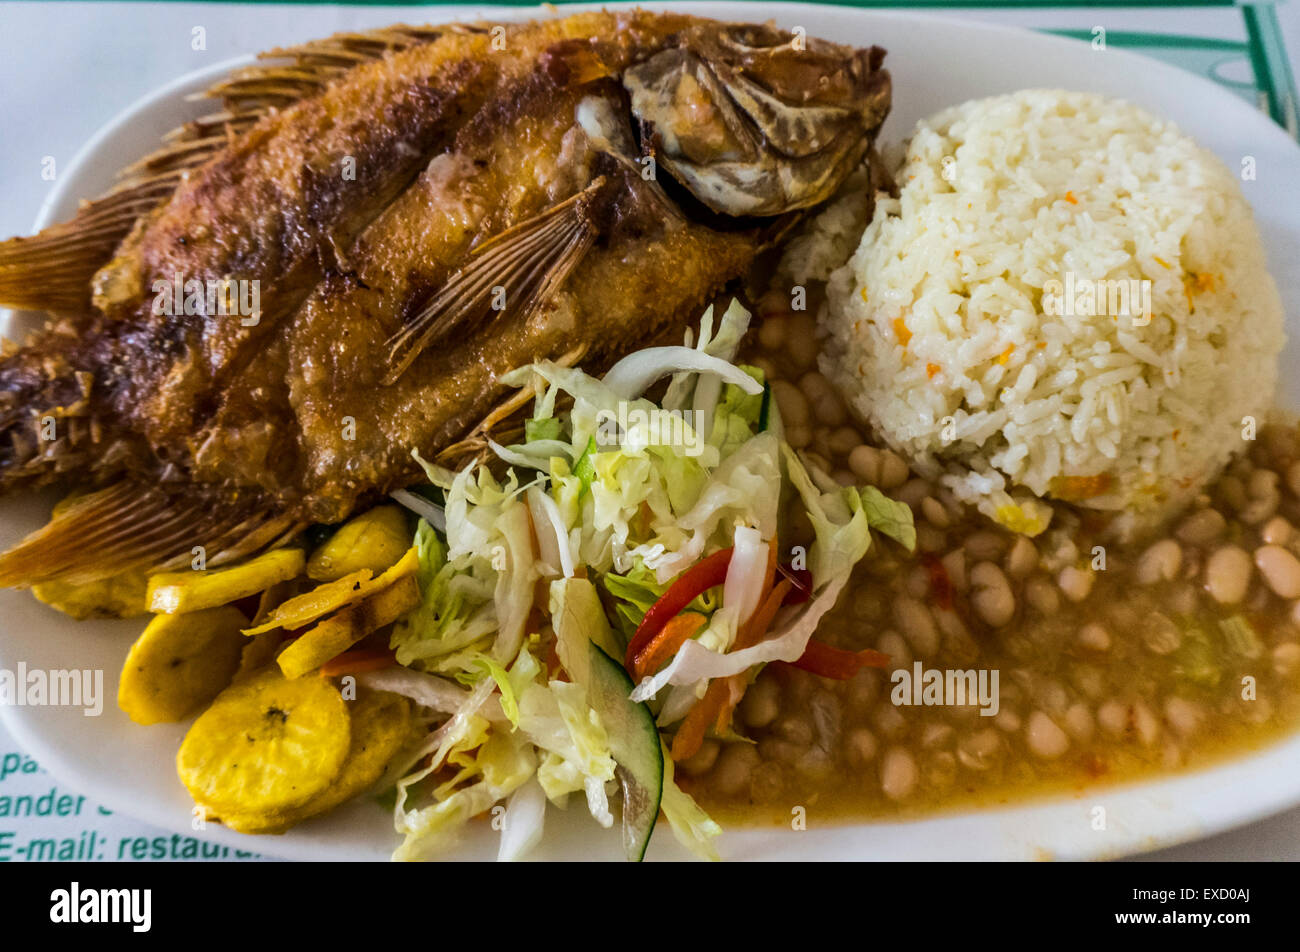 A typical meal of fried fish and coconut rice in the Caribbean coastal region of Colombia. Stock Photo